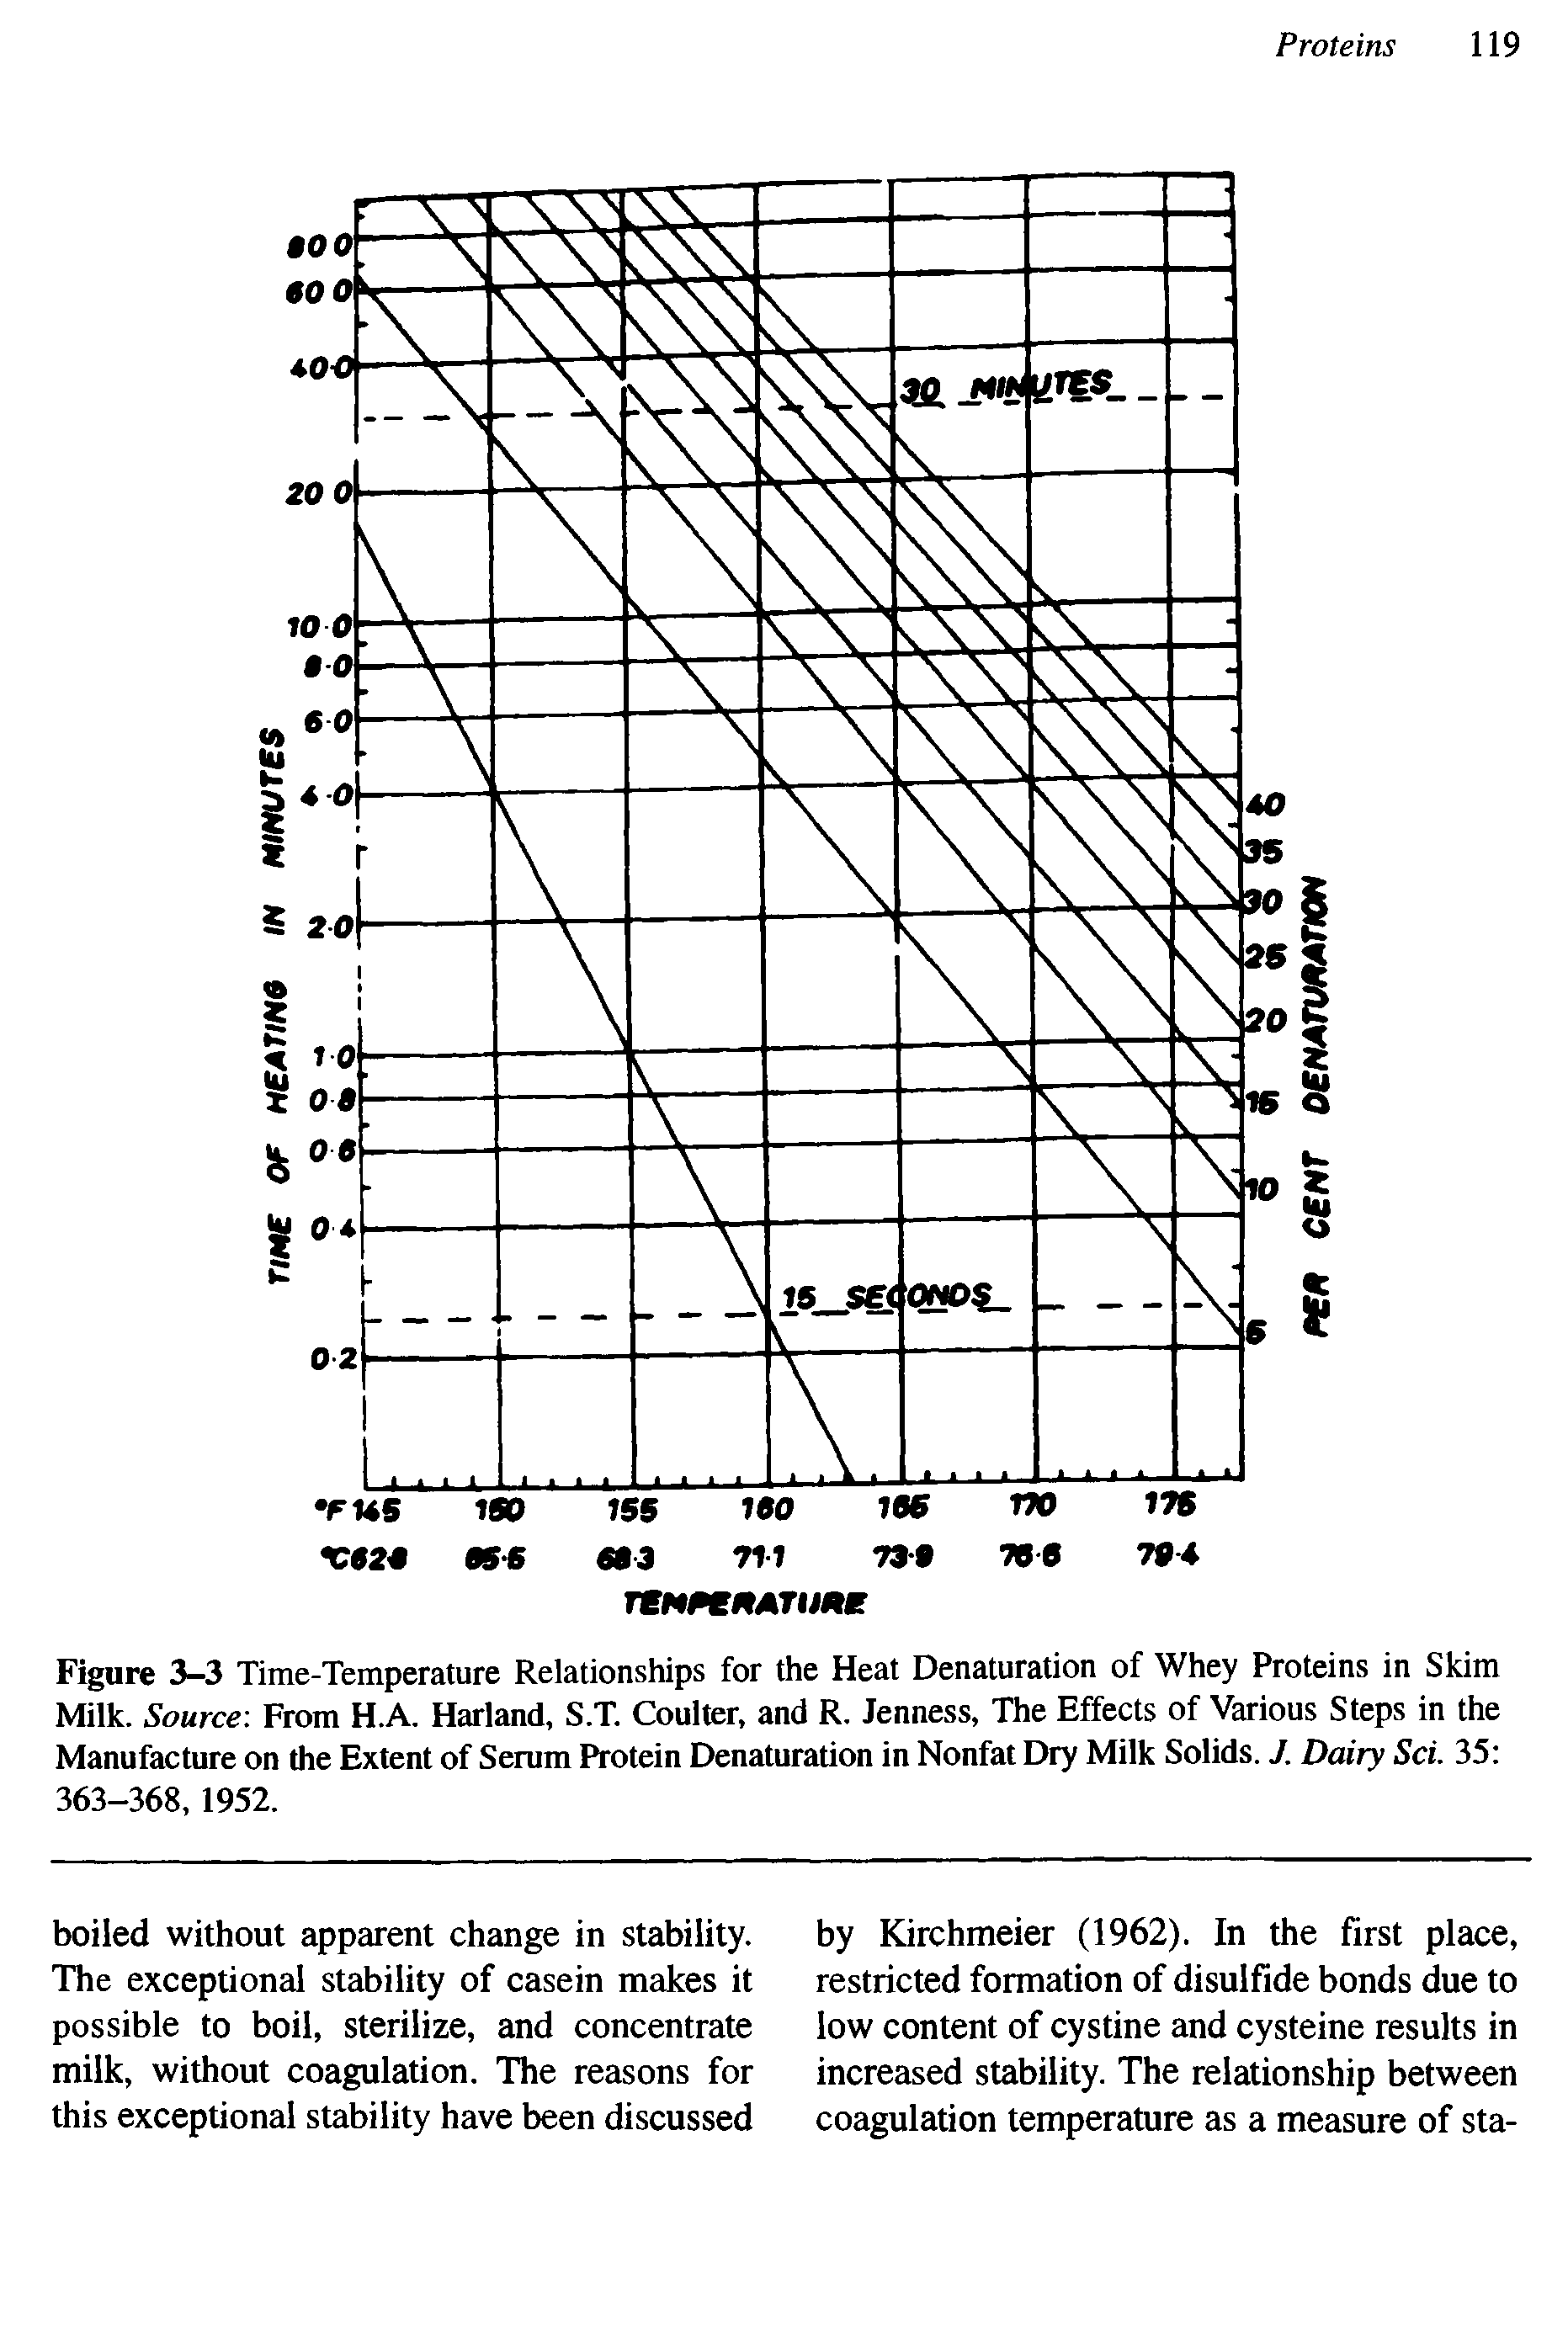 Figure 3-3 Time-Temperature Relationships for the Heat Denaturation of Whey Proteins in Skim Milk. Source From H.A. Harland, S.T. Coulter, and R. Jenness, The Effects of Various Steps in the Manufacture on the Extent of Serum Protein Denaturation in Nonfat Dry Milk Solids. / Dairy Sci. 35 363-368, 1952.